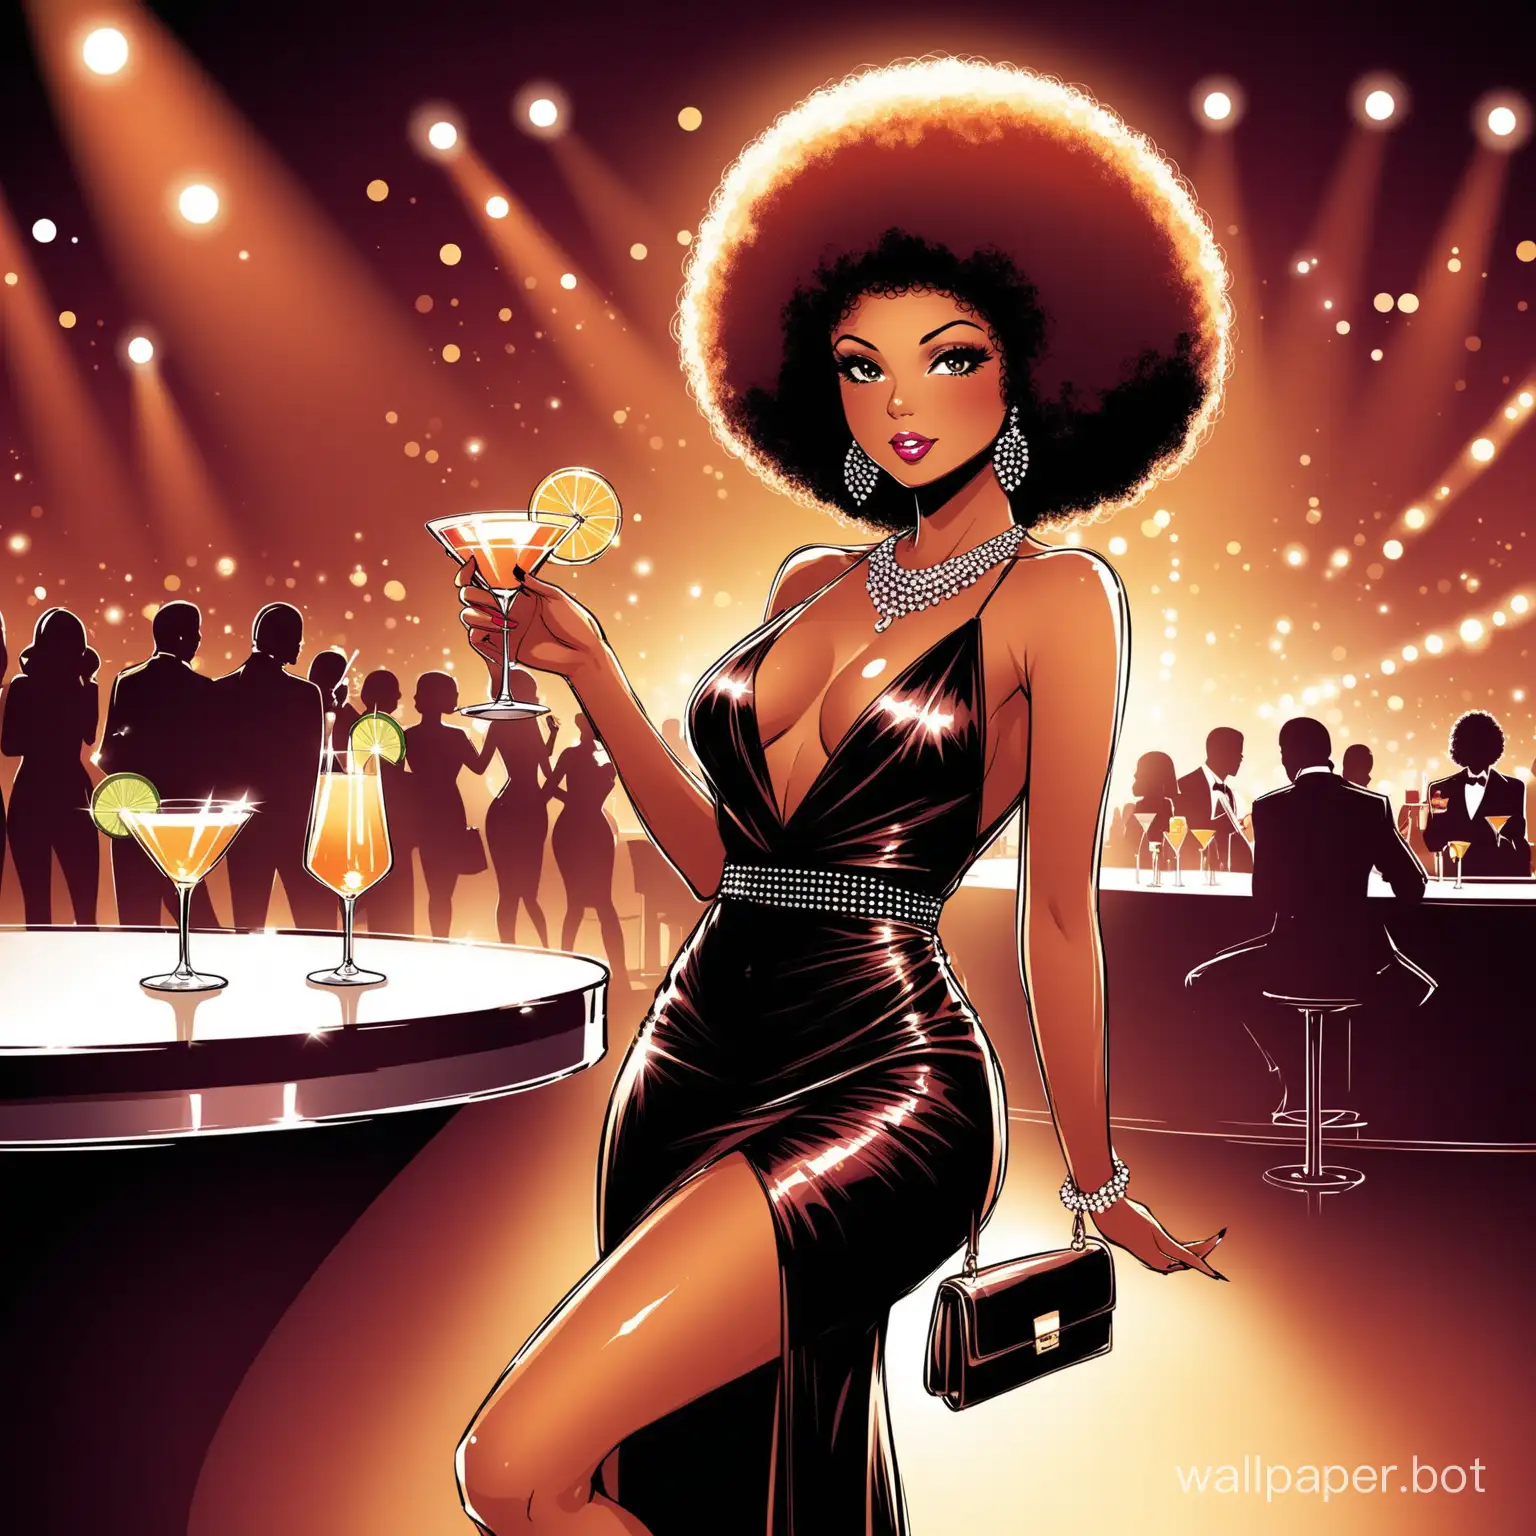 Glamorous-Lady-with-Afro-in-Nightclub-Holding-Martini